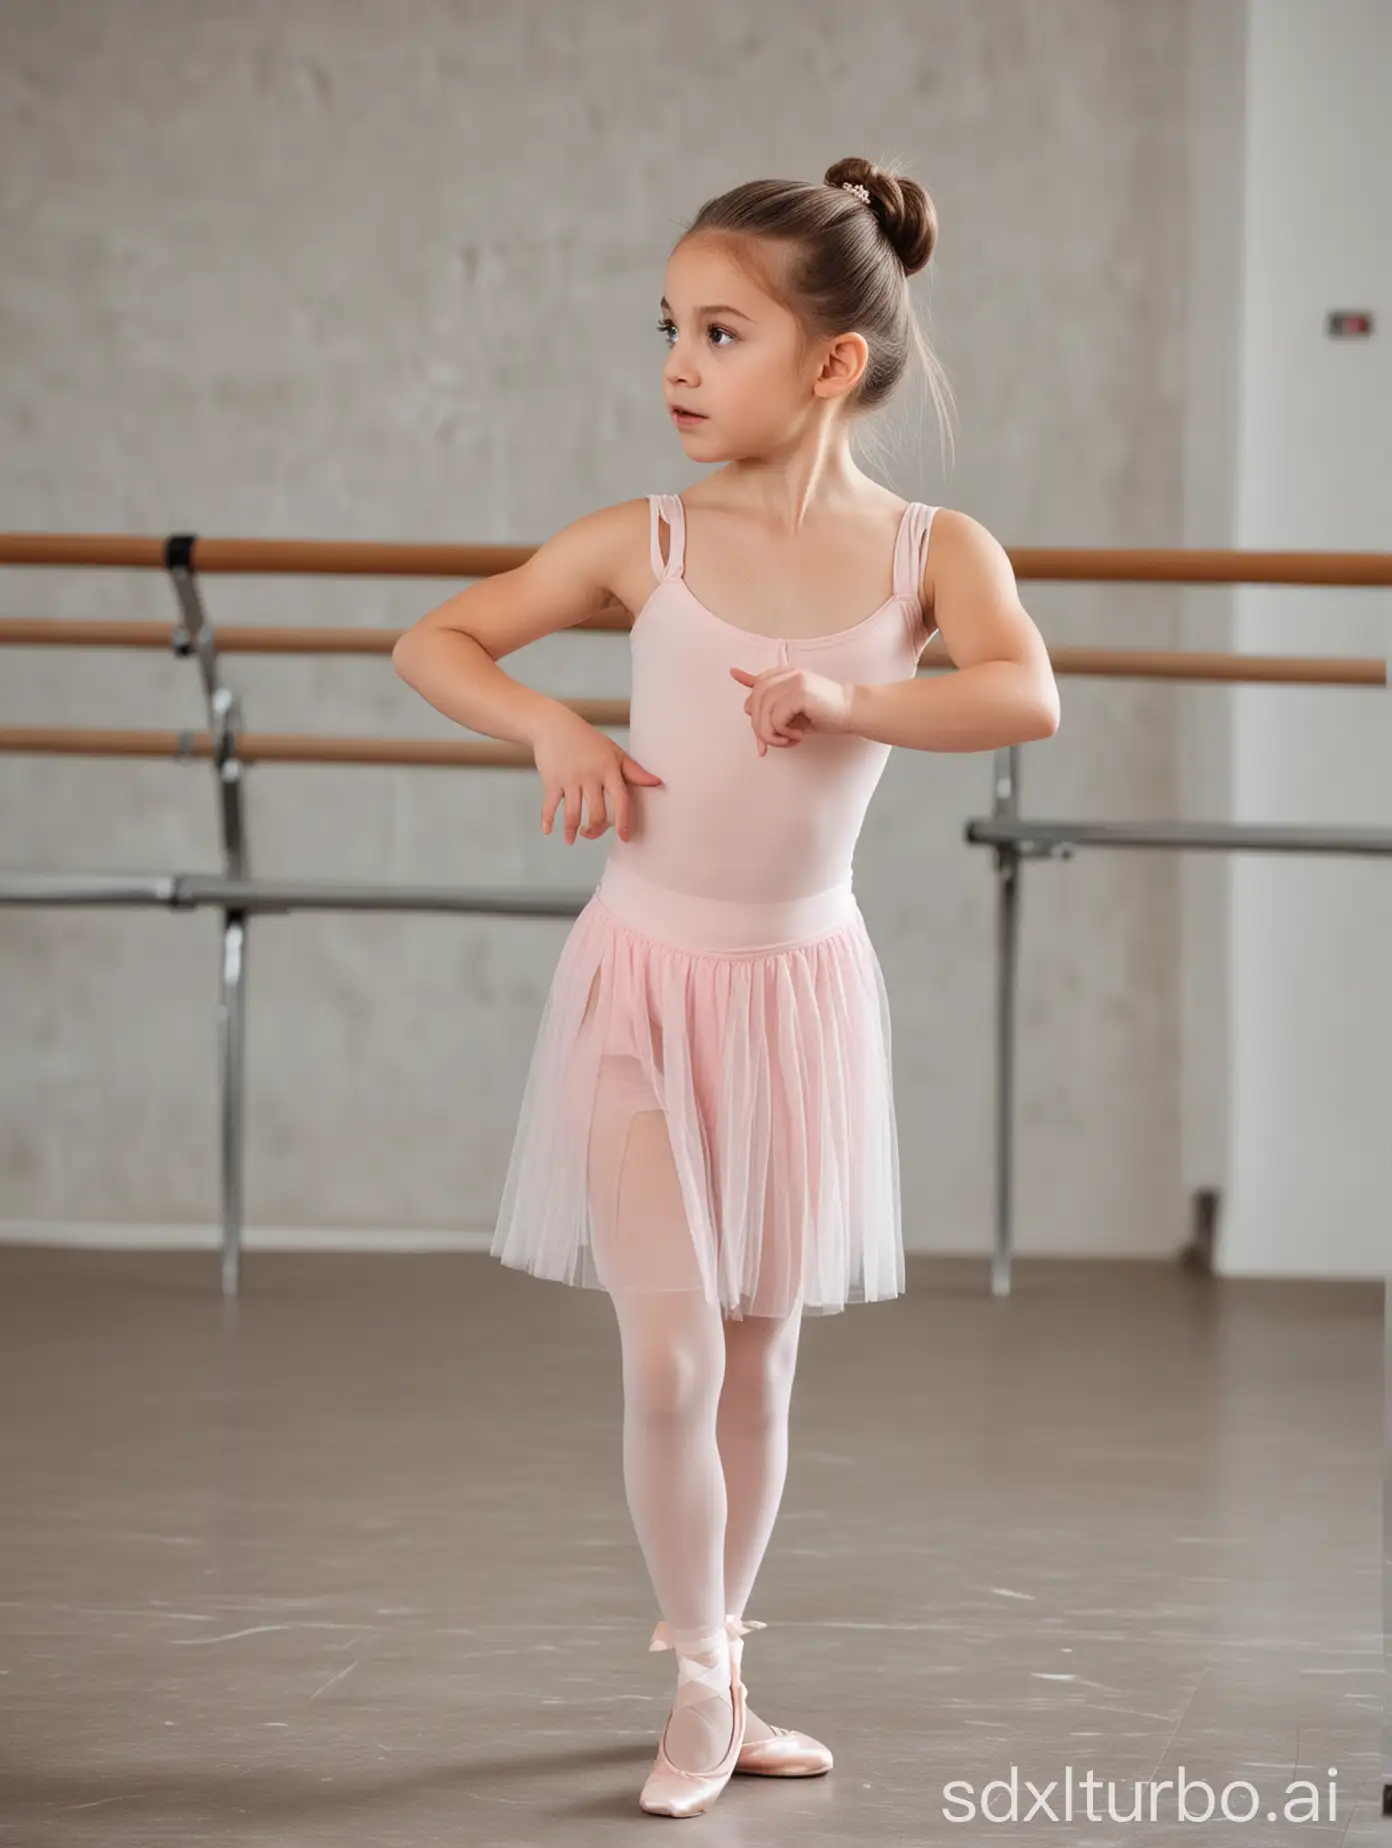 7 years old ballerina, long hair in pony tail, extremely muscular, topless, at ballet lesson